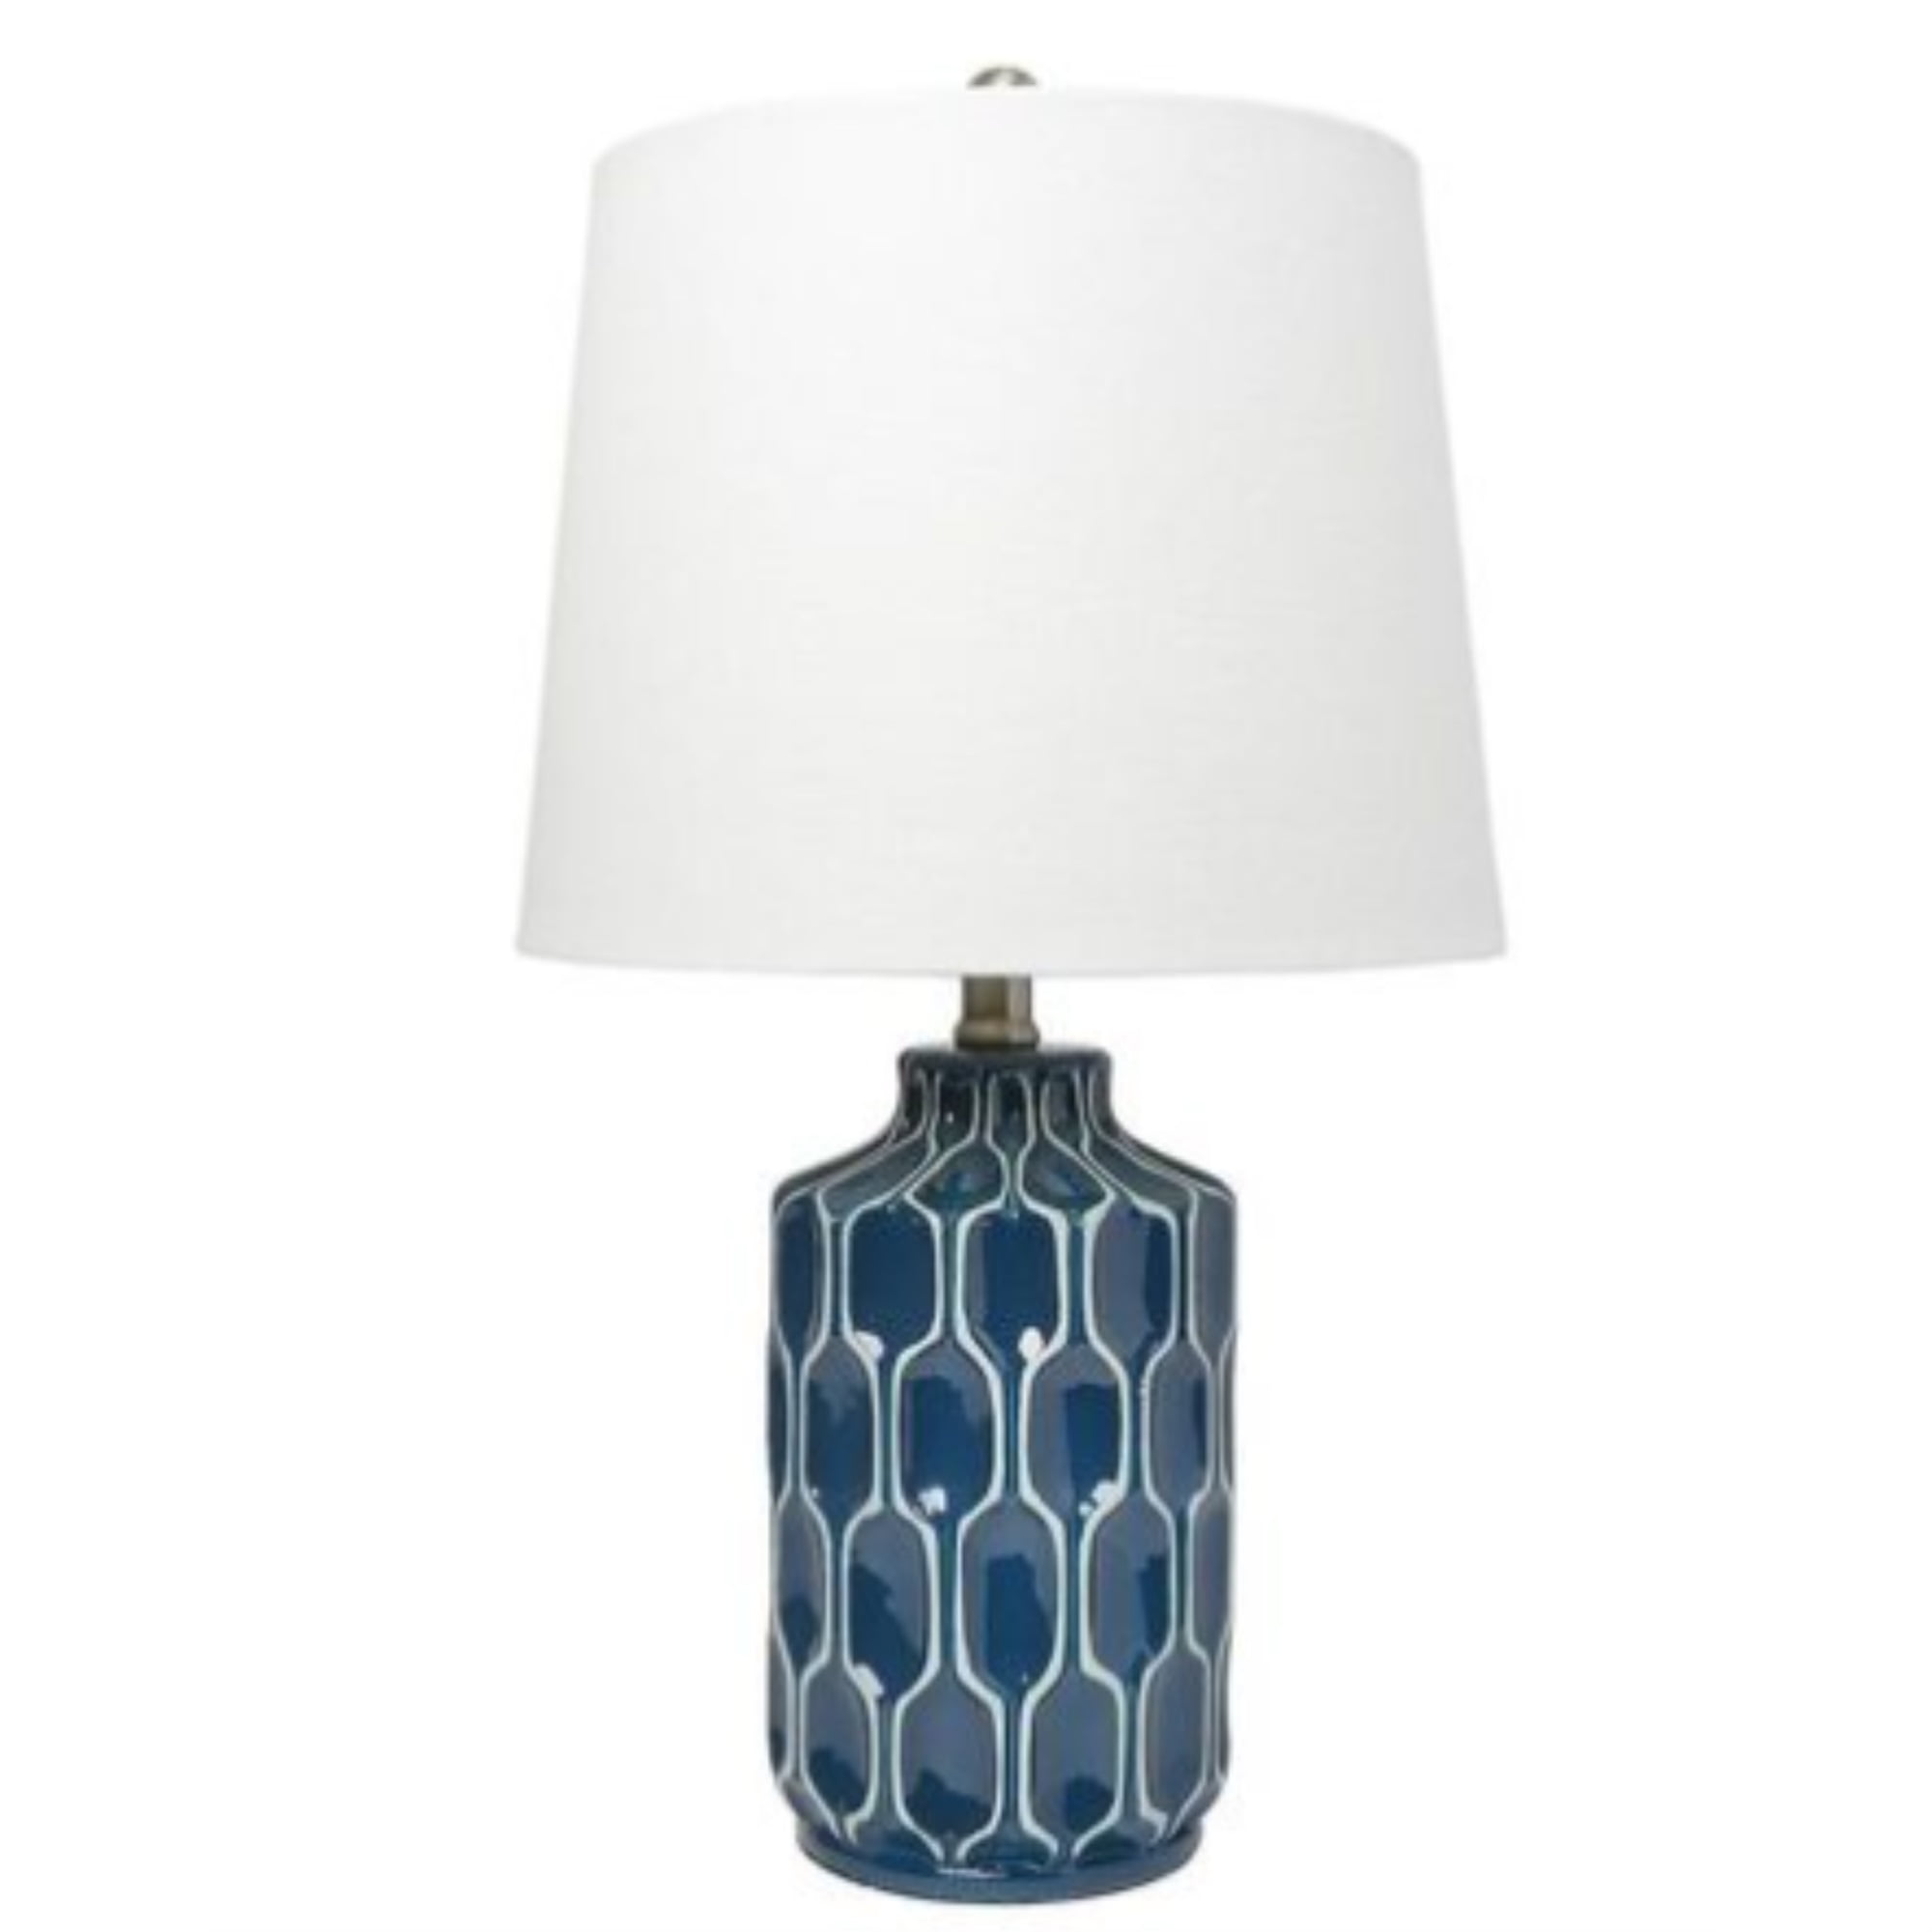  Lalia Home Moroccan Table Lamp with Fabric White Shade, Blue